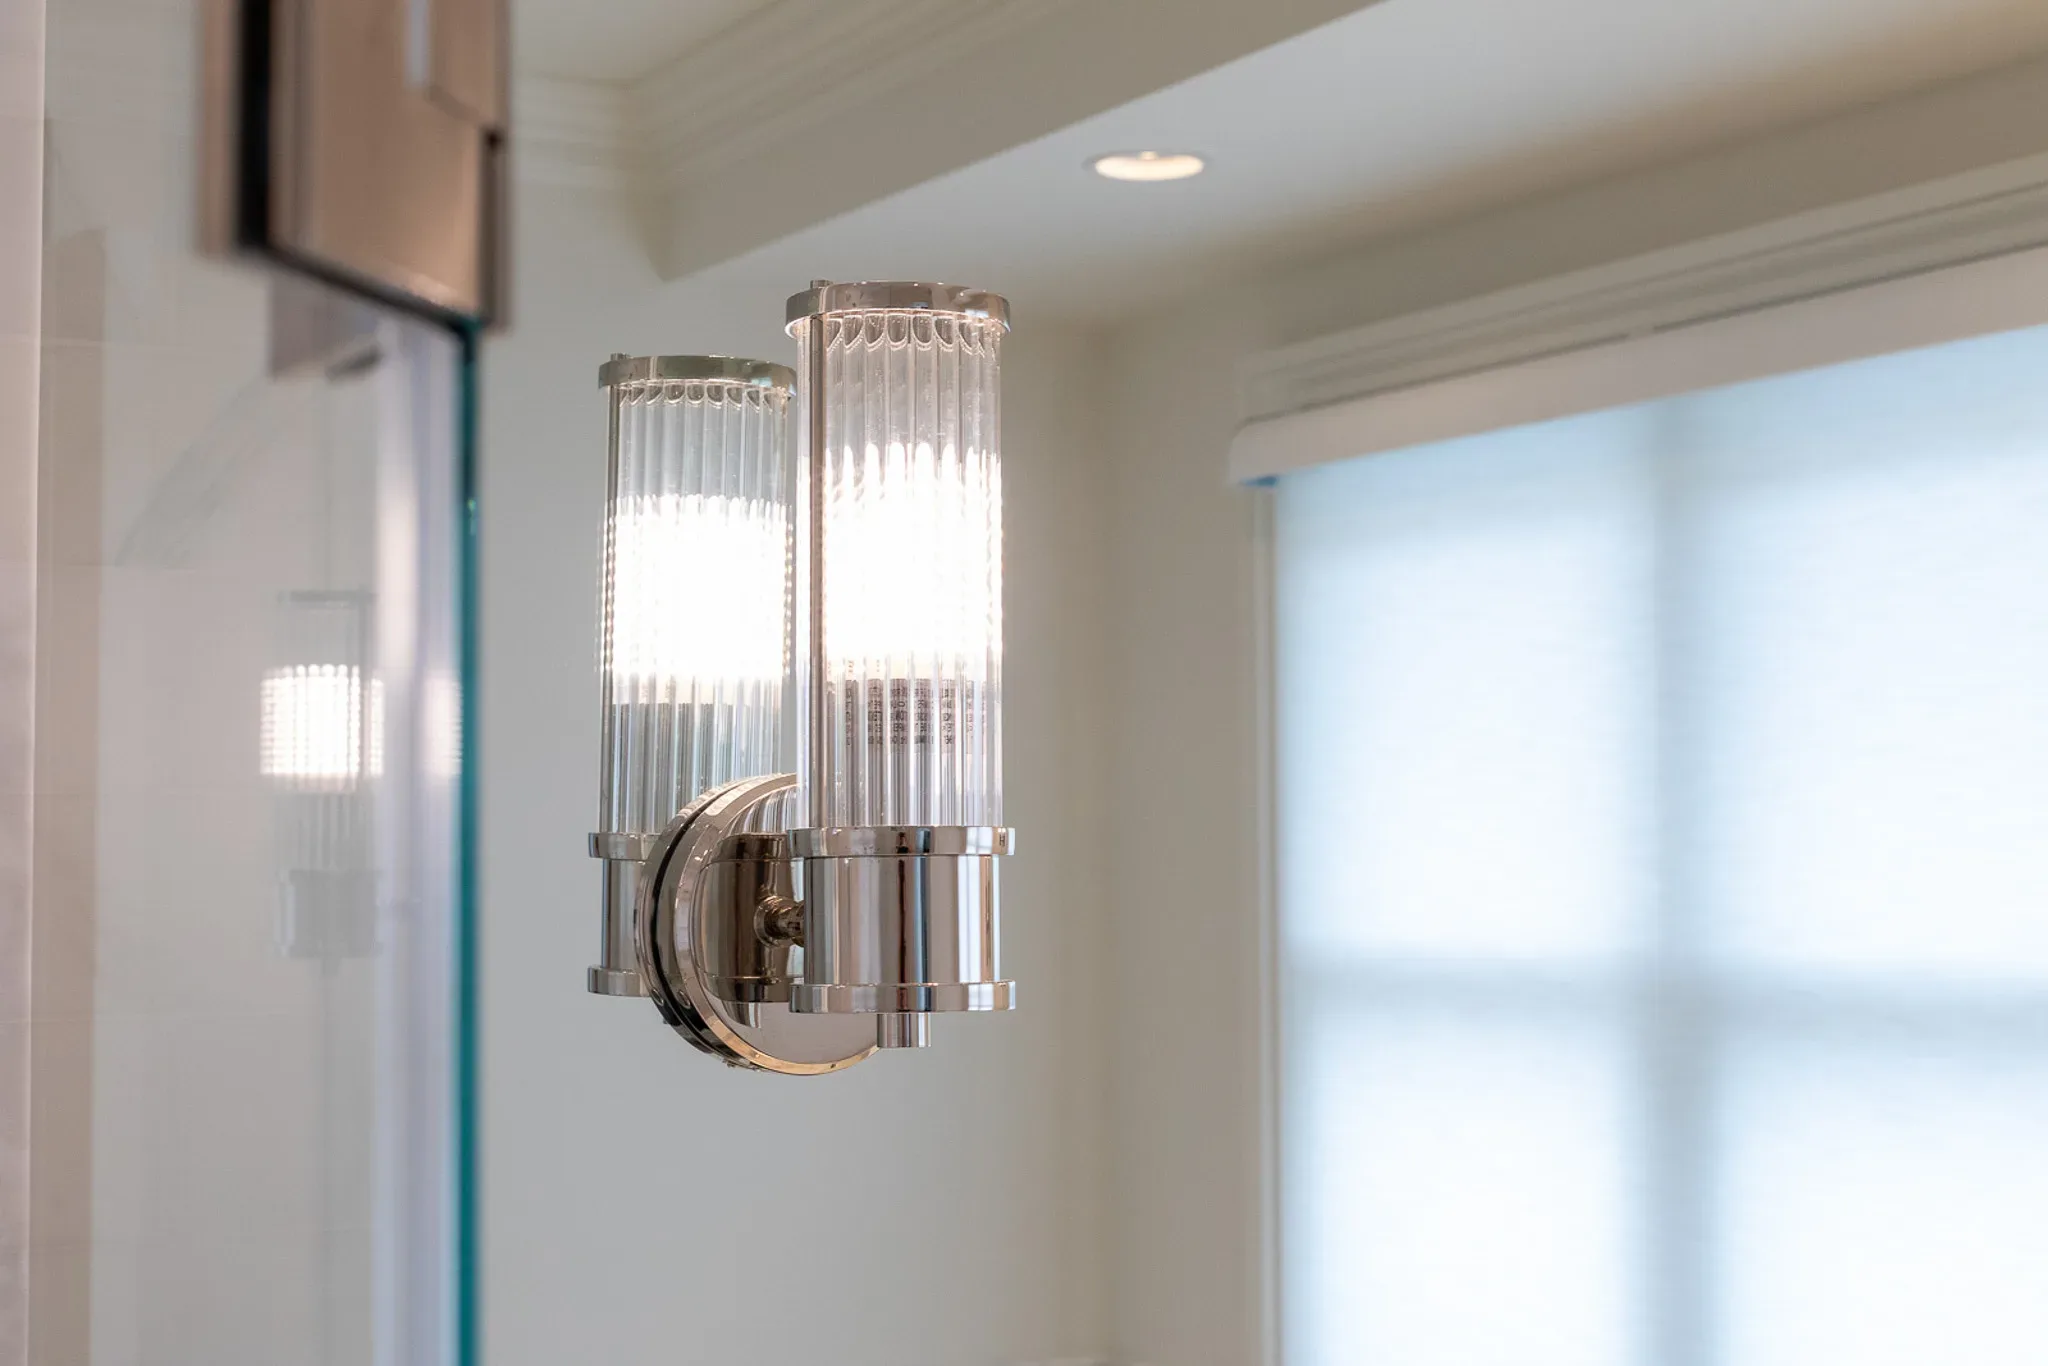 A light fixture in a bathroom with a glass door.